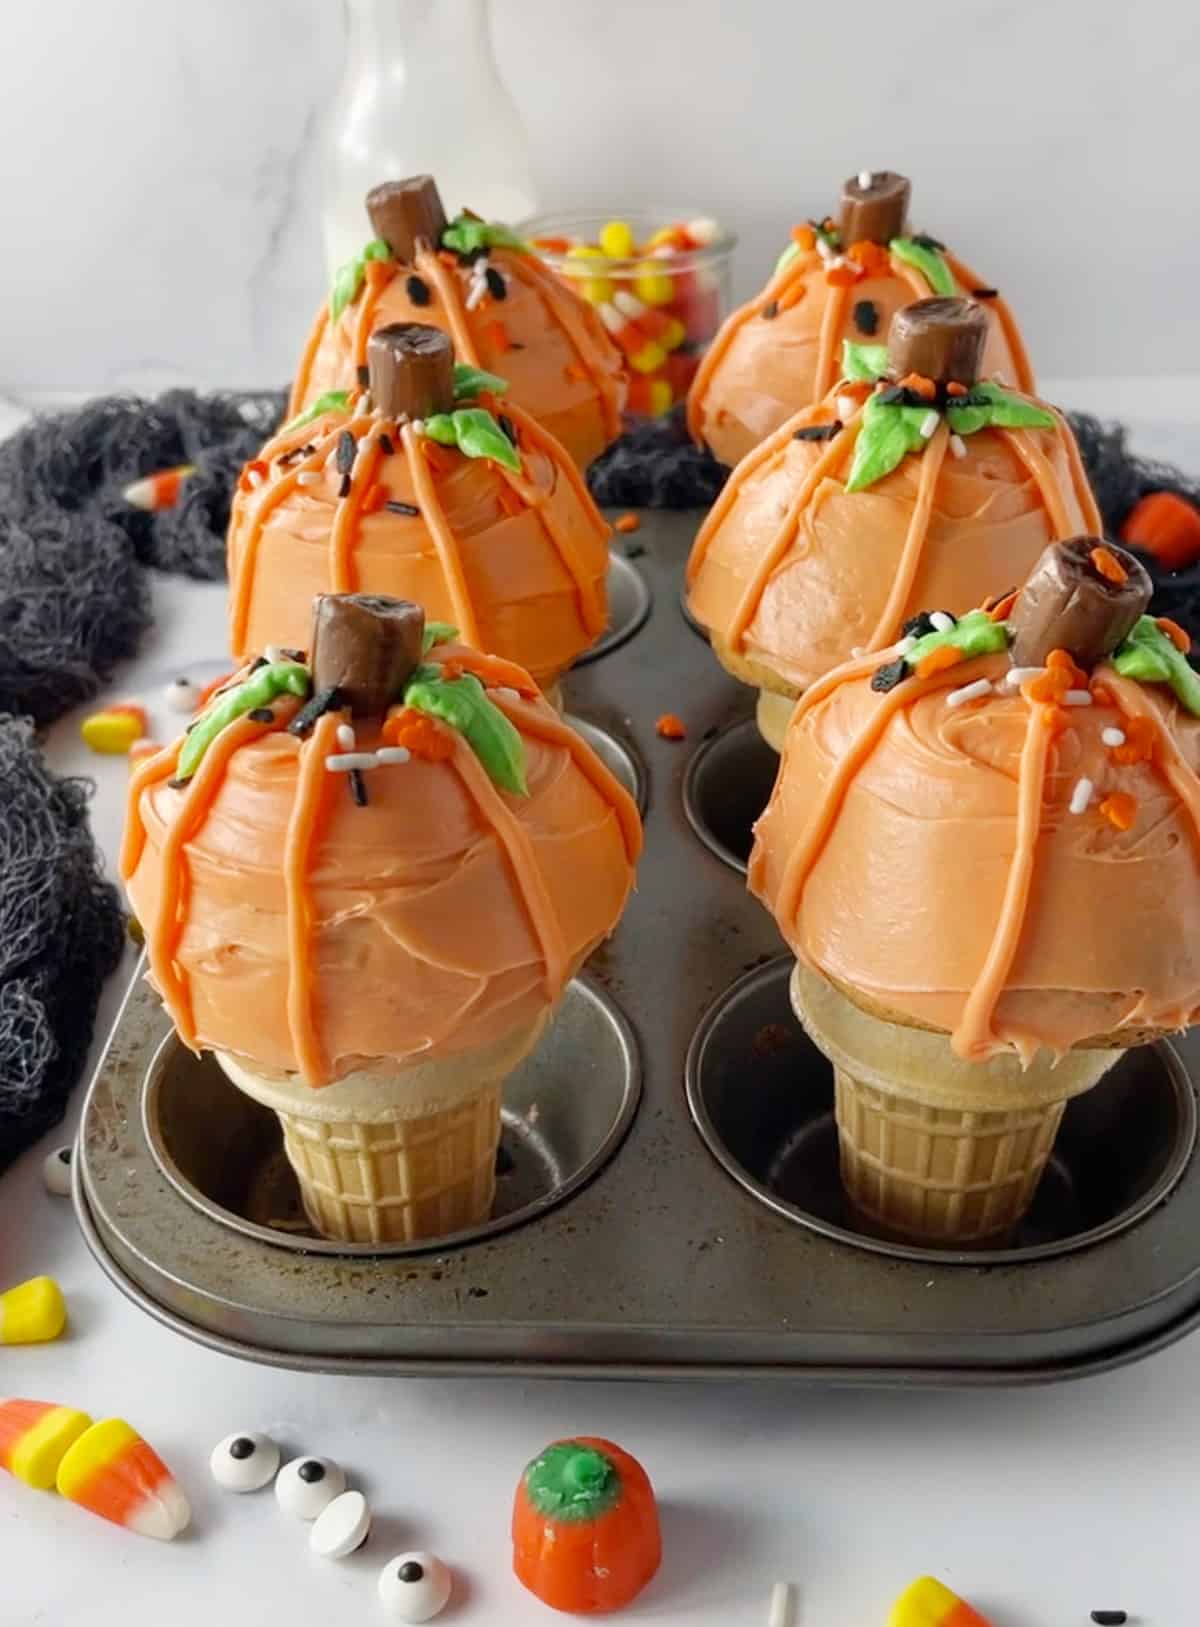 Six Ice cream cone cupcakes that have been frosted and decorated in muffin pan.